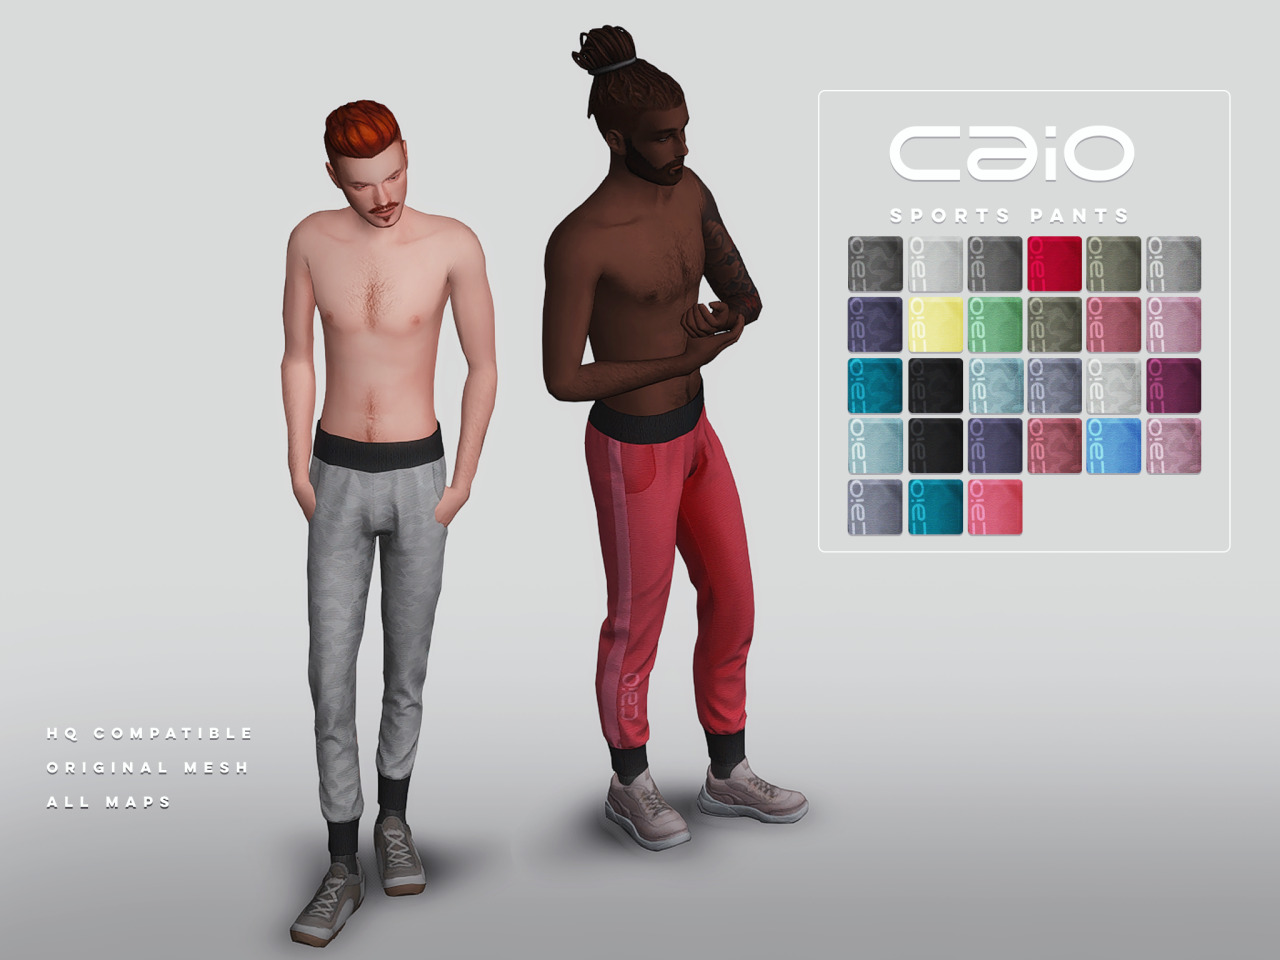 caio-cc: Male Sport Pants info at image; Hope you... - Emily CC Finds